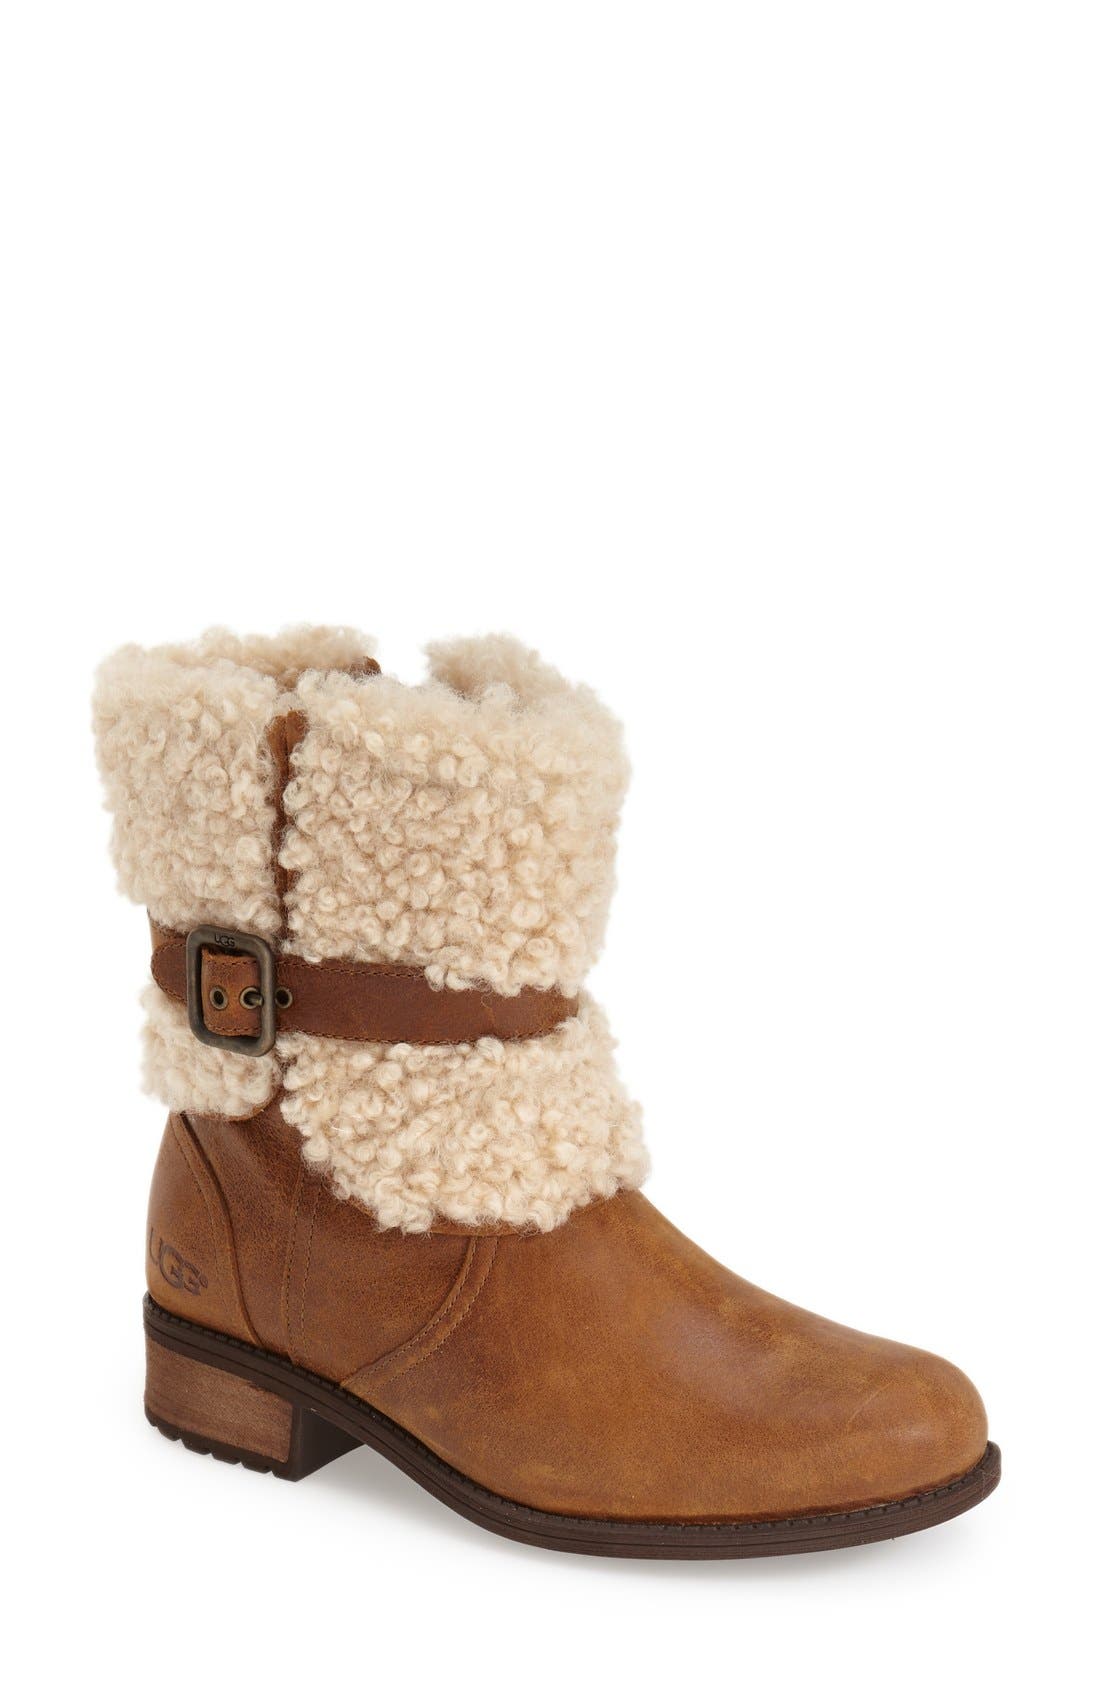 uggs boots at nordstrom